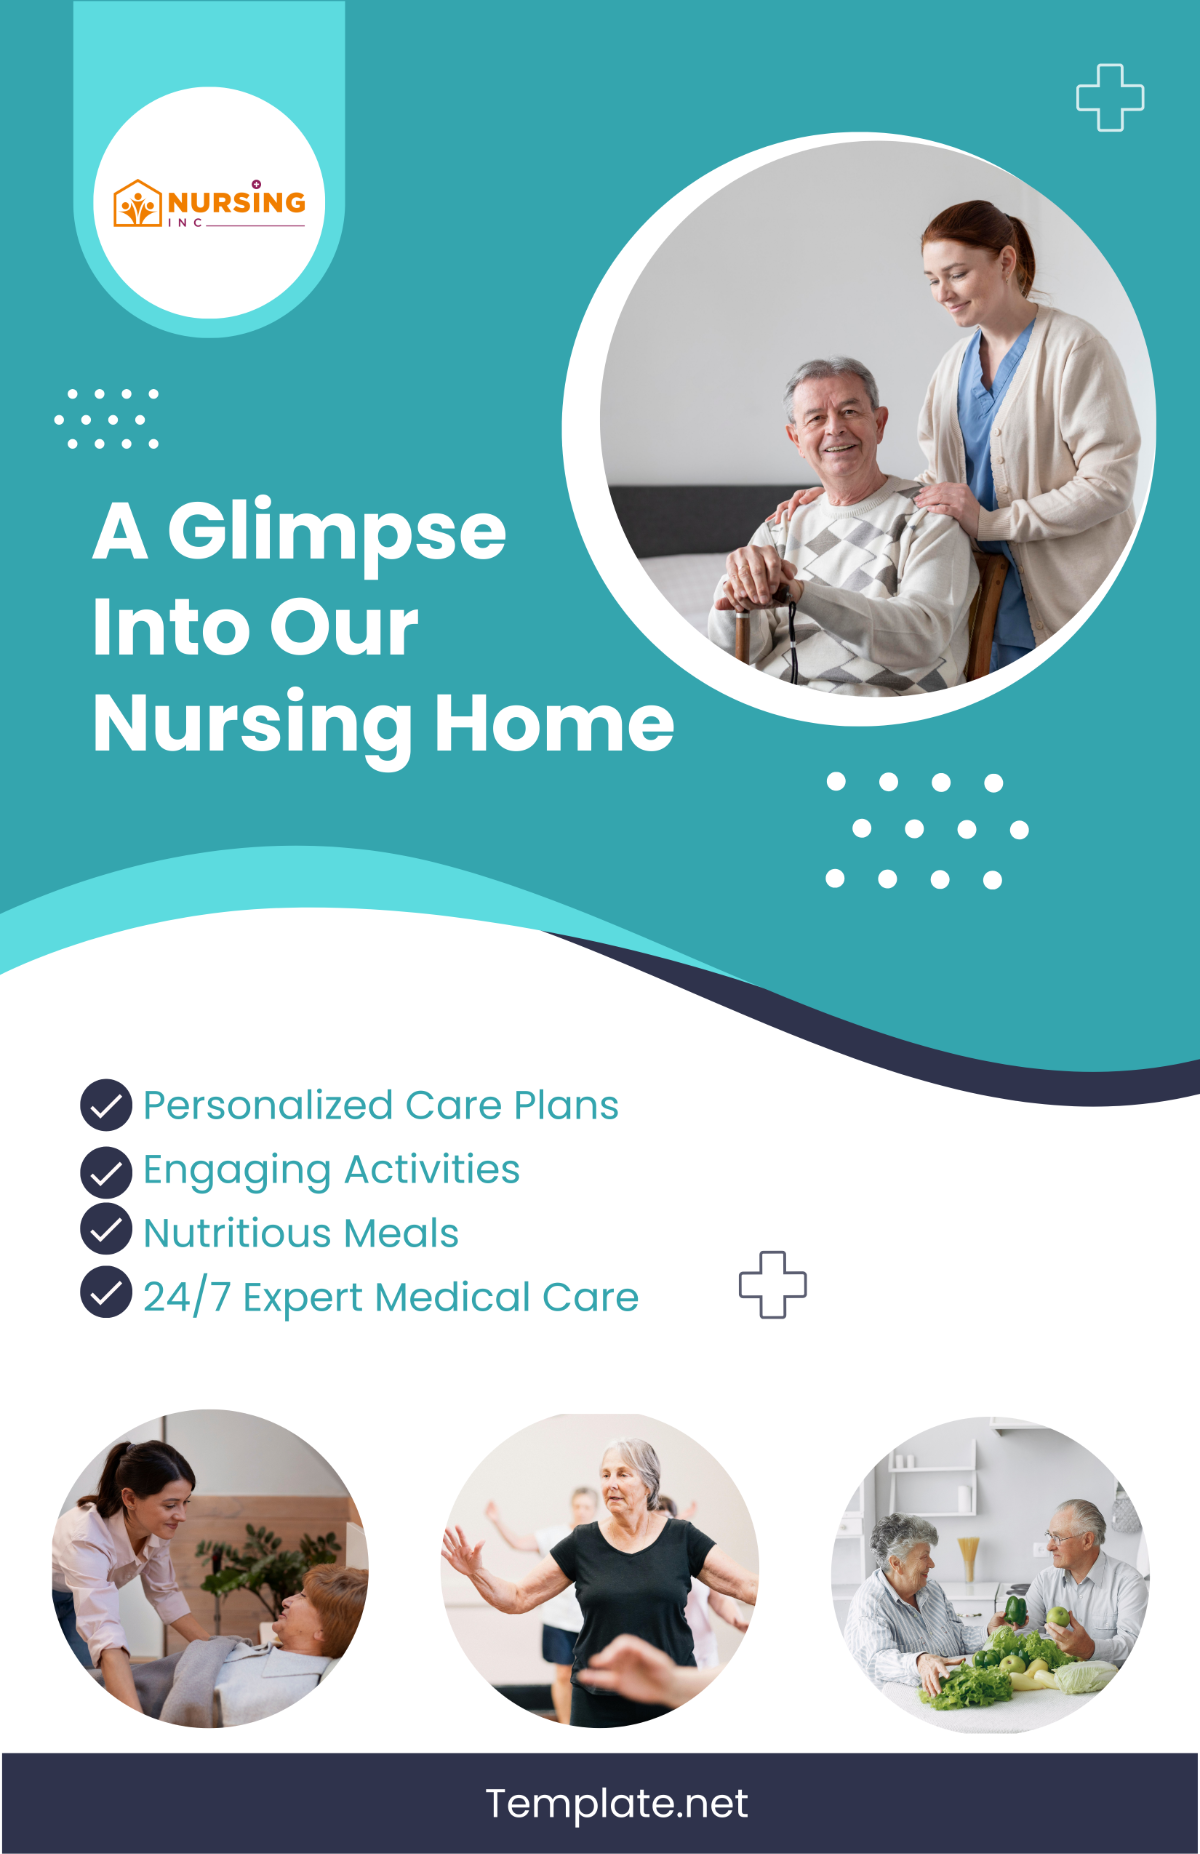 Welcome Home: A Glimpse into Our Nursing Home Poster Template